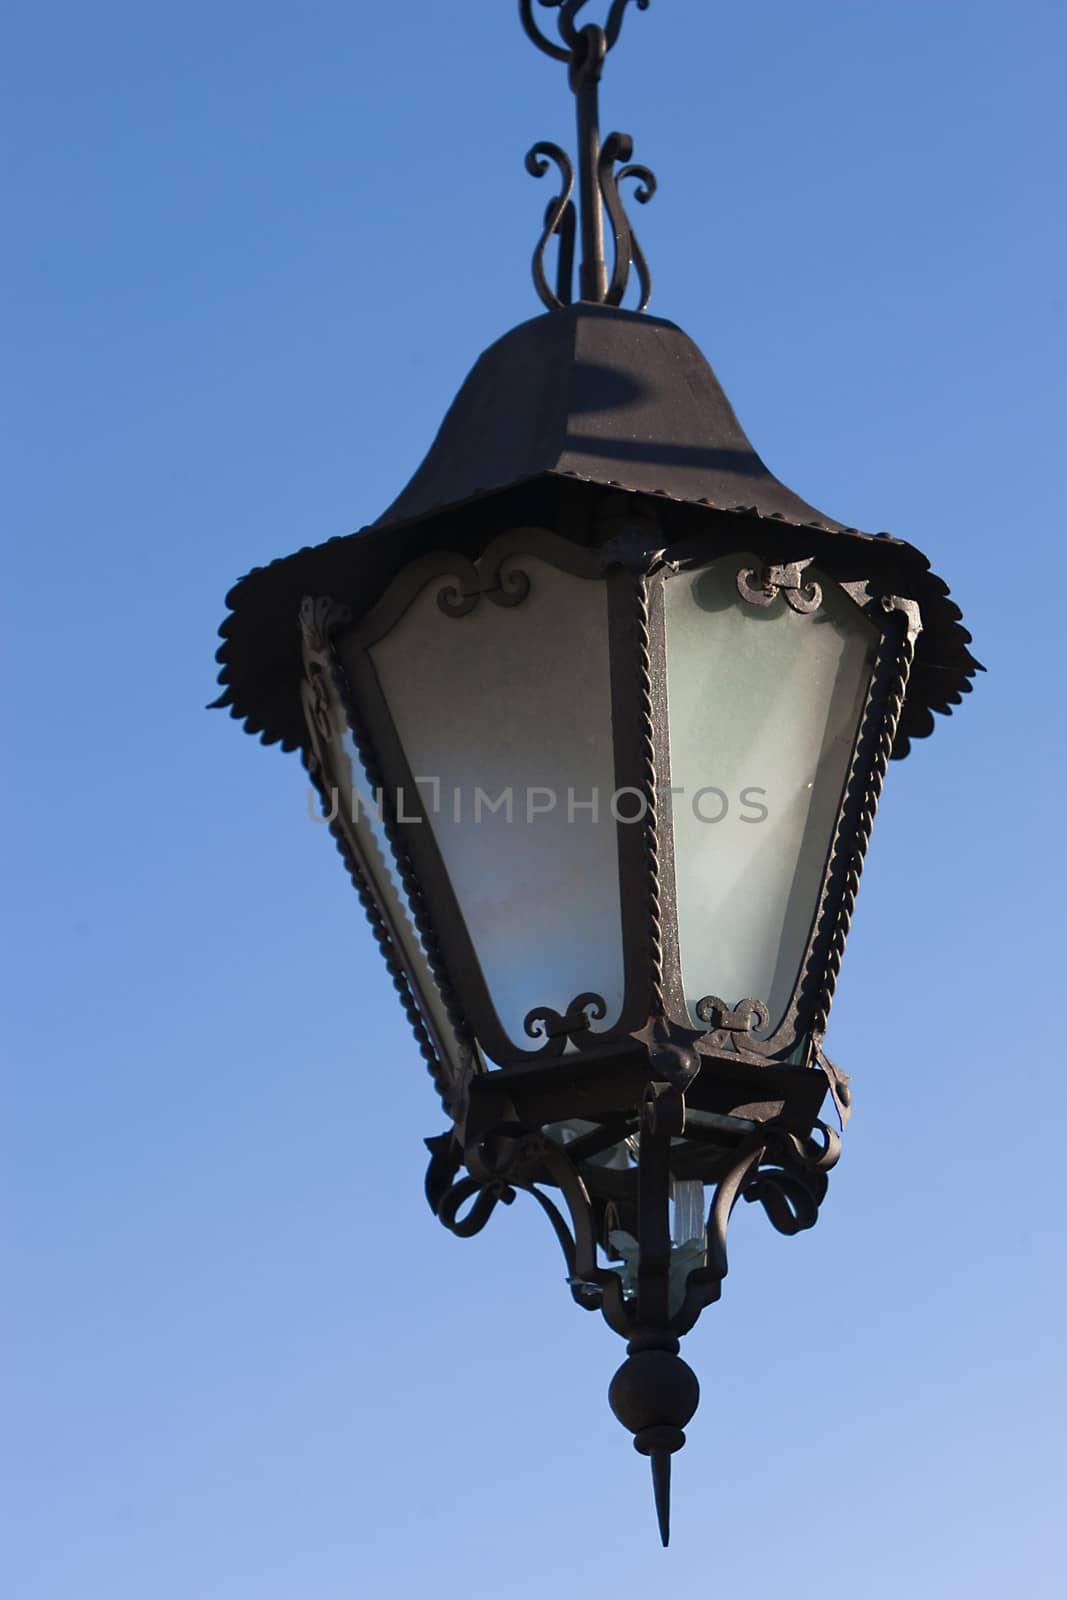 A wrought iron lamp on a weathered wall in Spain by digicomphoto